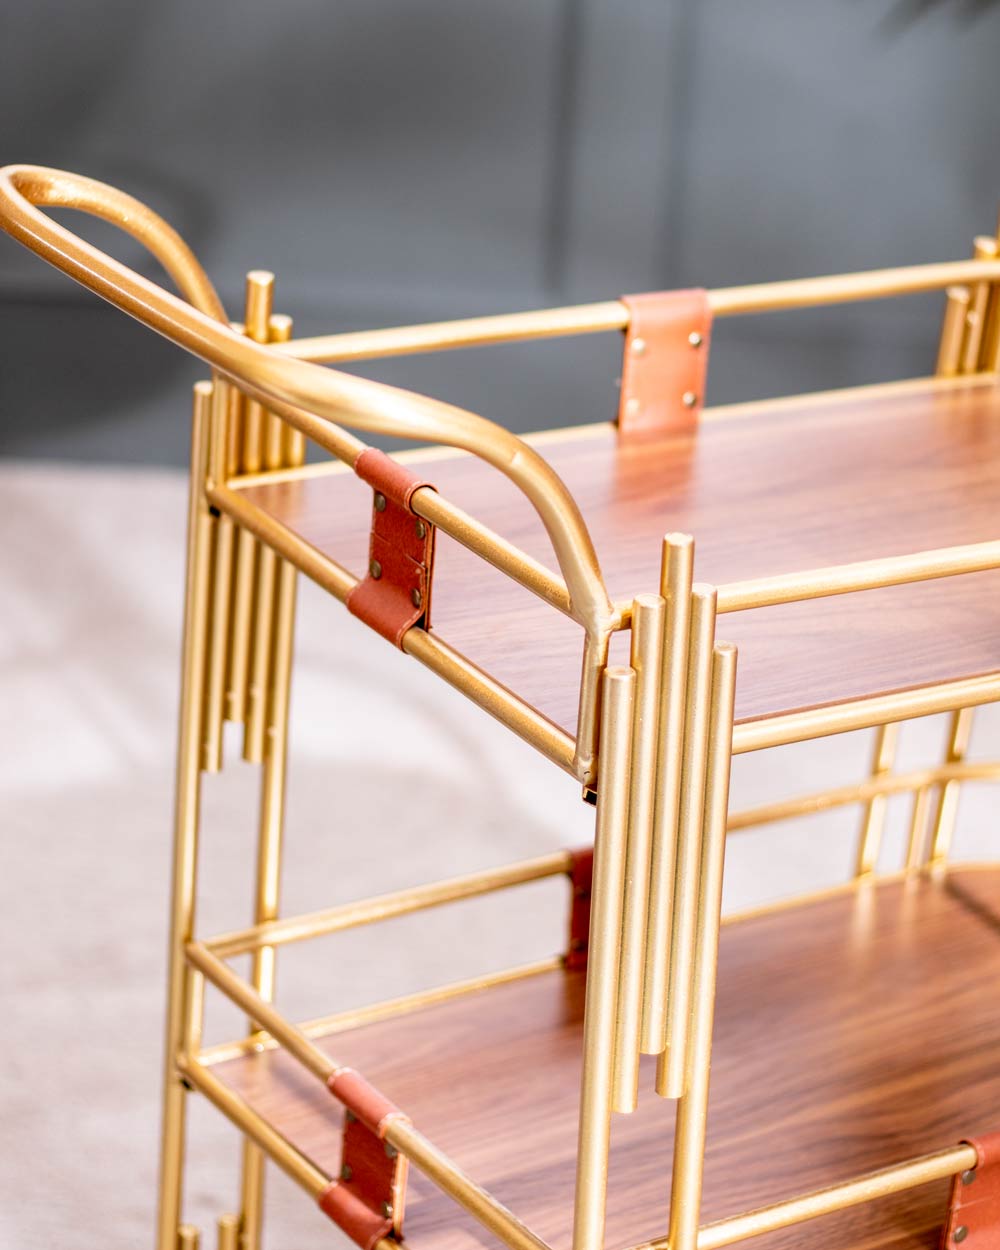 Efficient and Functional 3-Tier Bar Cart